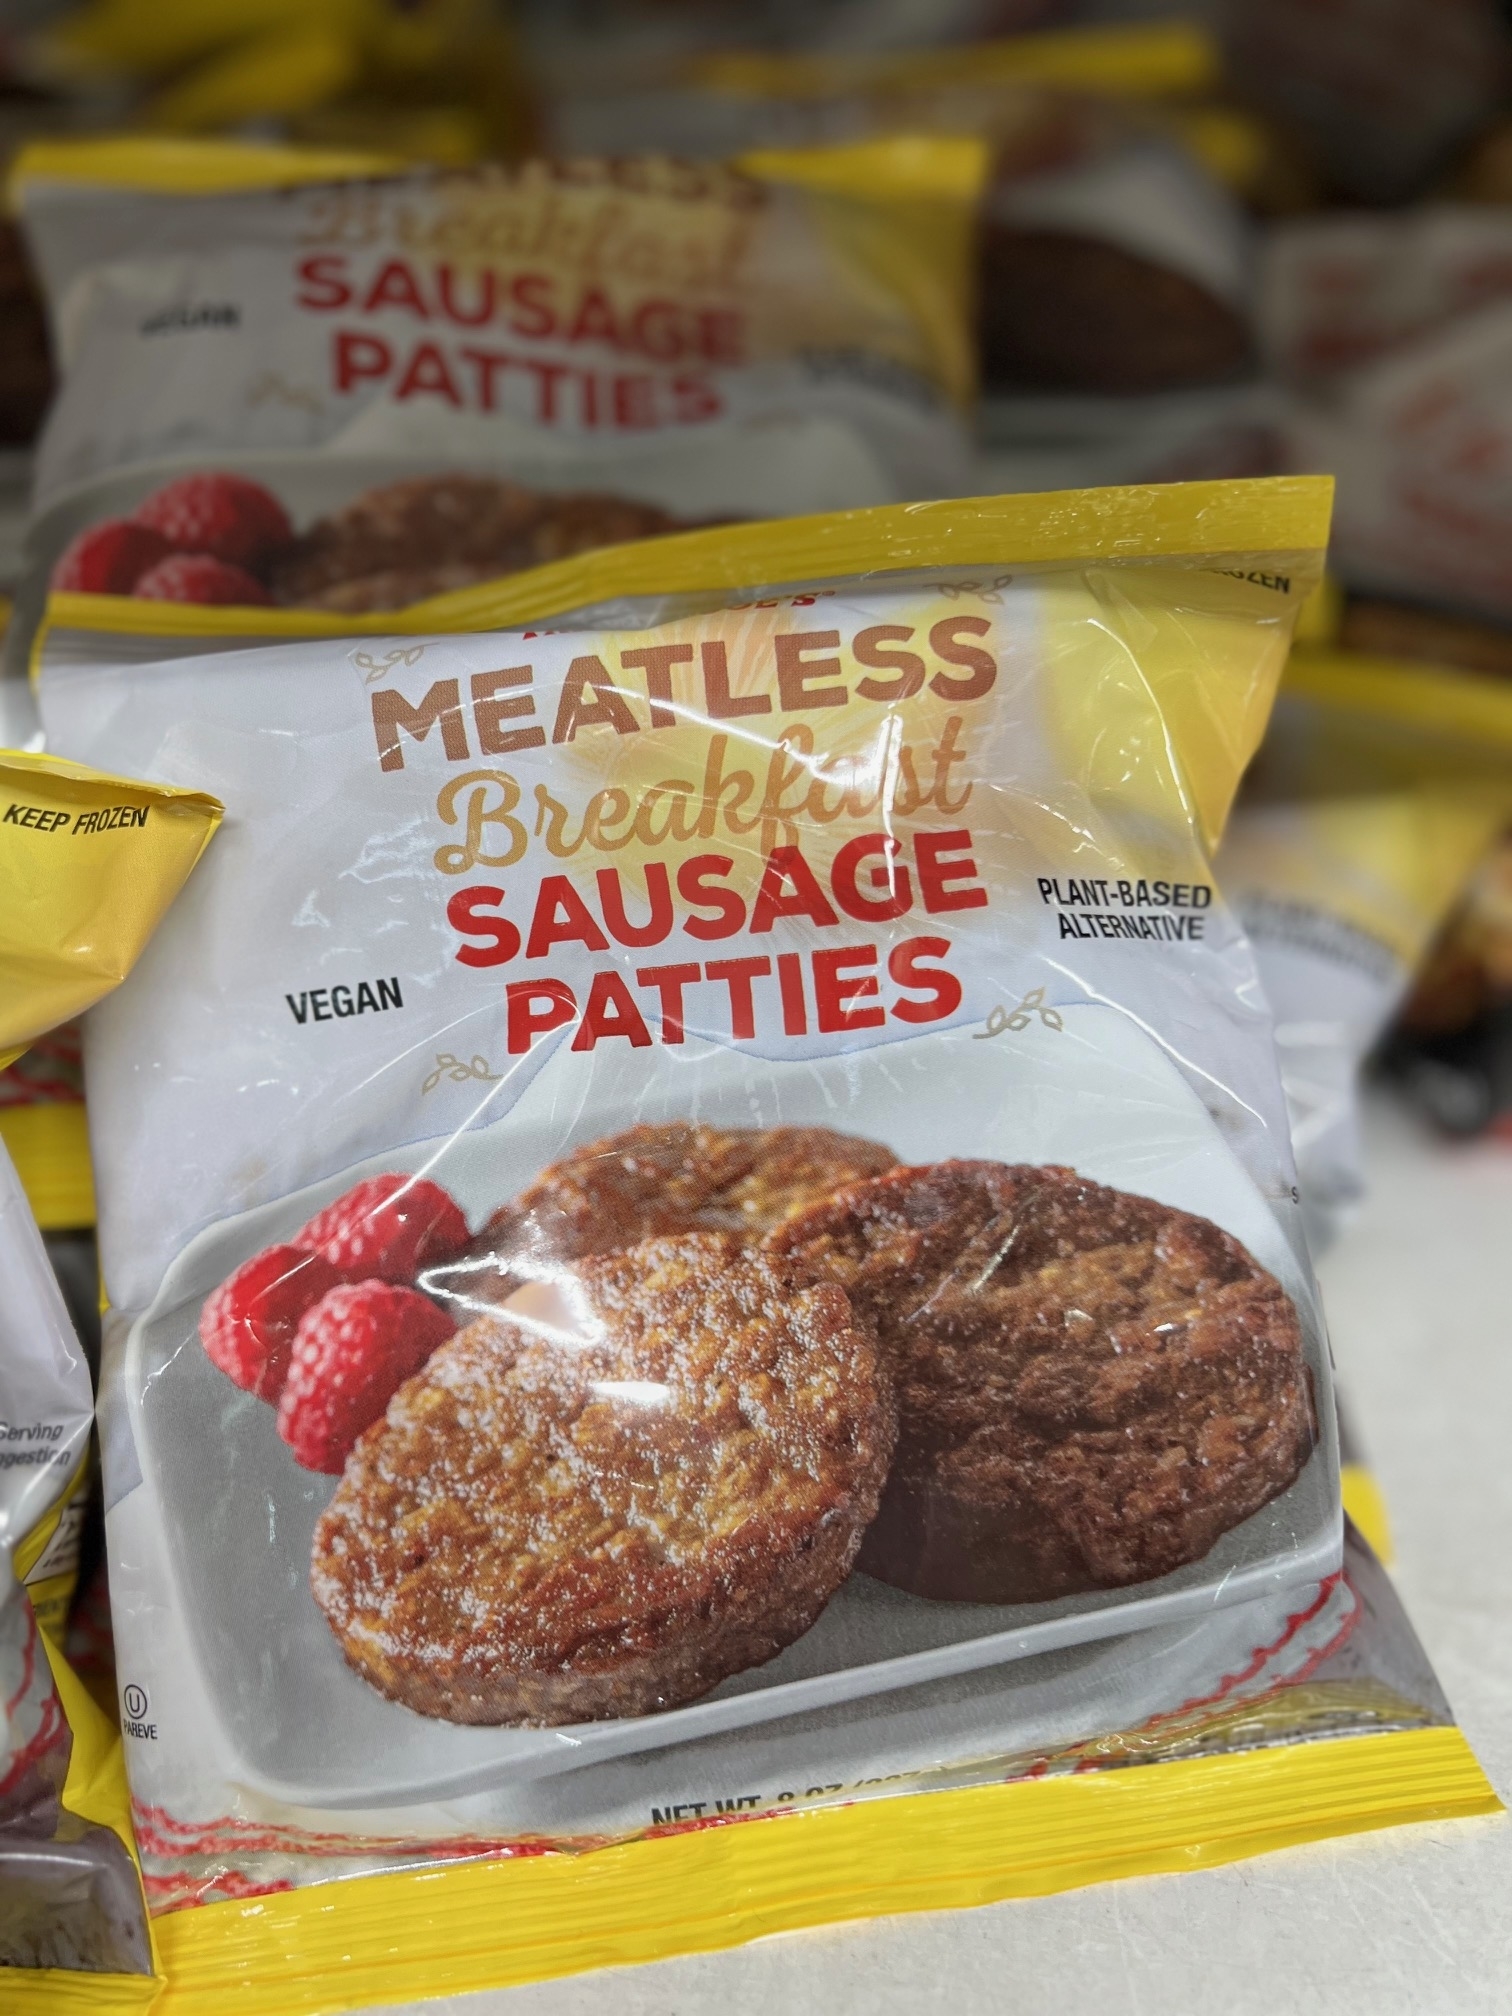 Package of Meatless Breakfast Sausage Patties on a store shelf, marked as vegan and plant-based